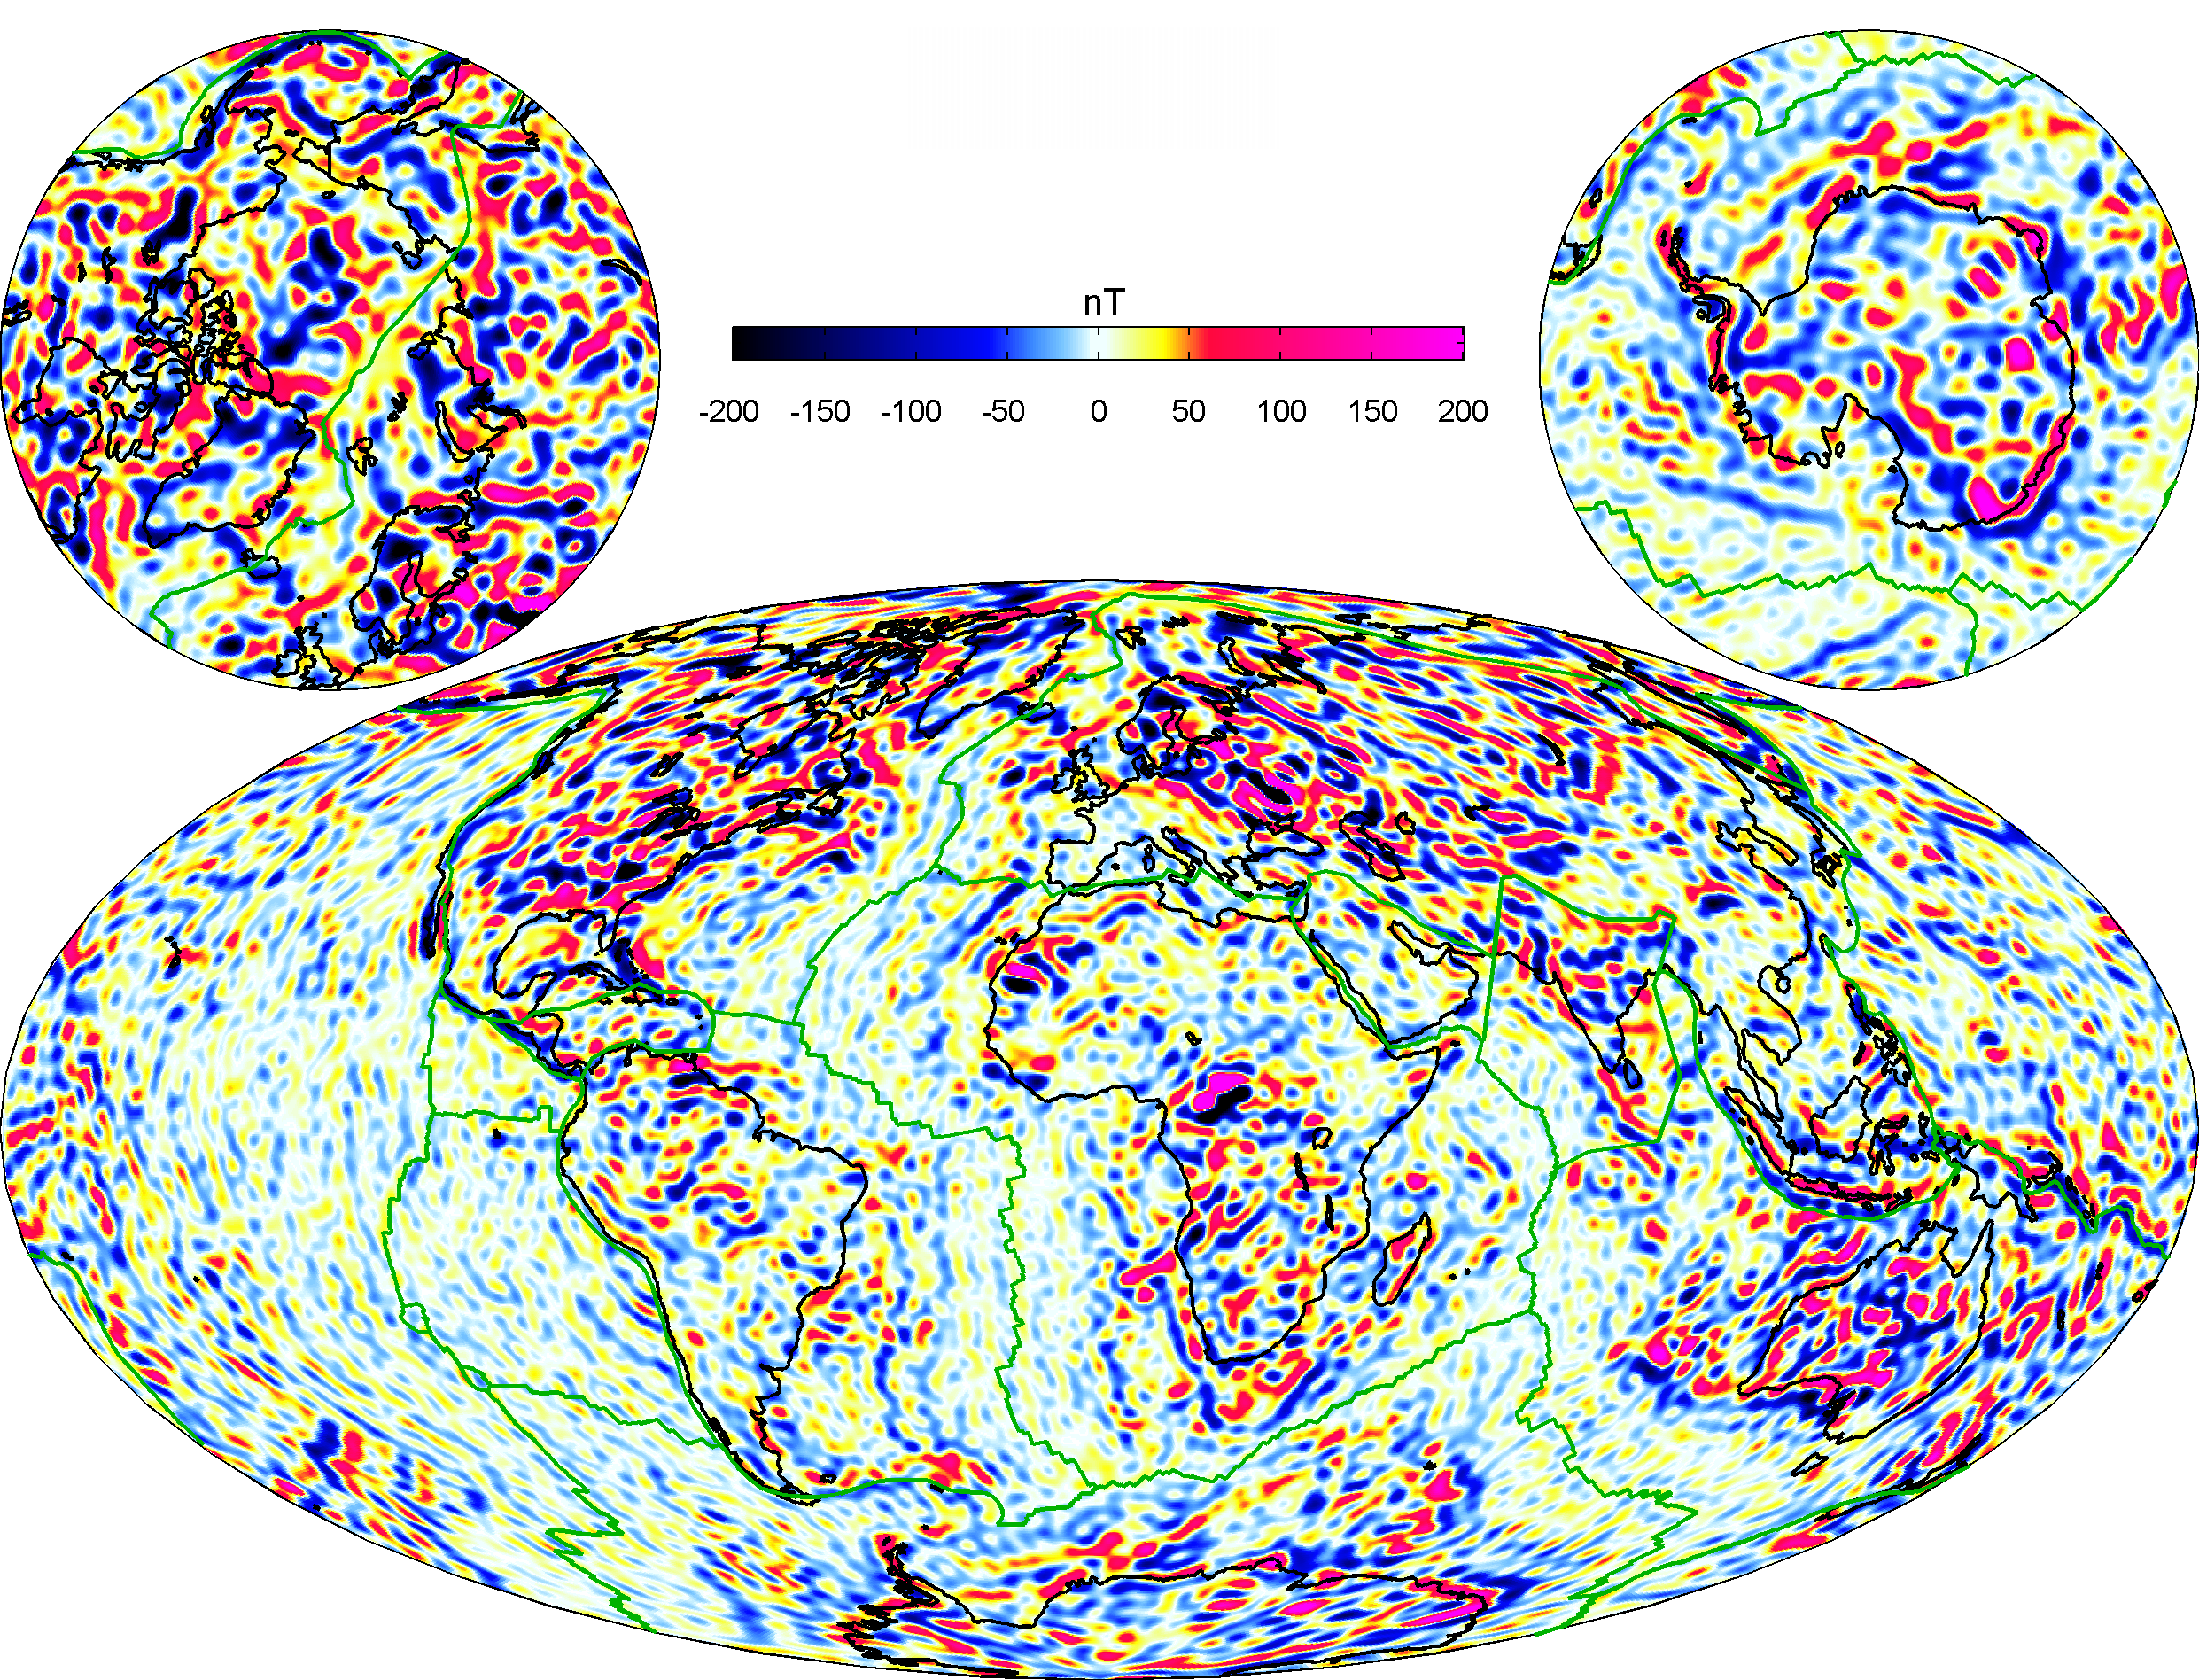 Figure 3: A model of the vertical component of the lithospheric field; strongest lithospheric fields are shown in red and blue. Large continental anomalies and symmetrical features either side of the Atlantic sea-floor spreading axis are clearly visible.